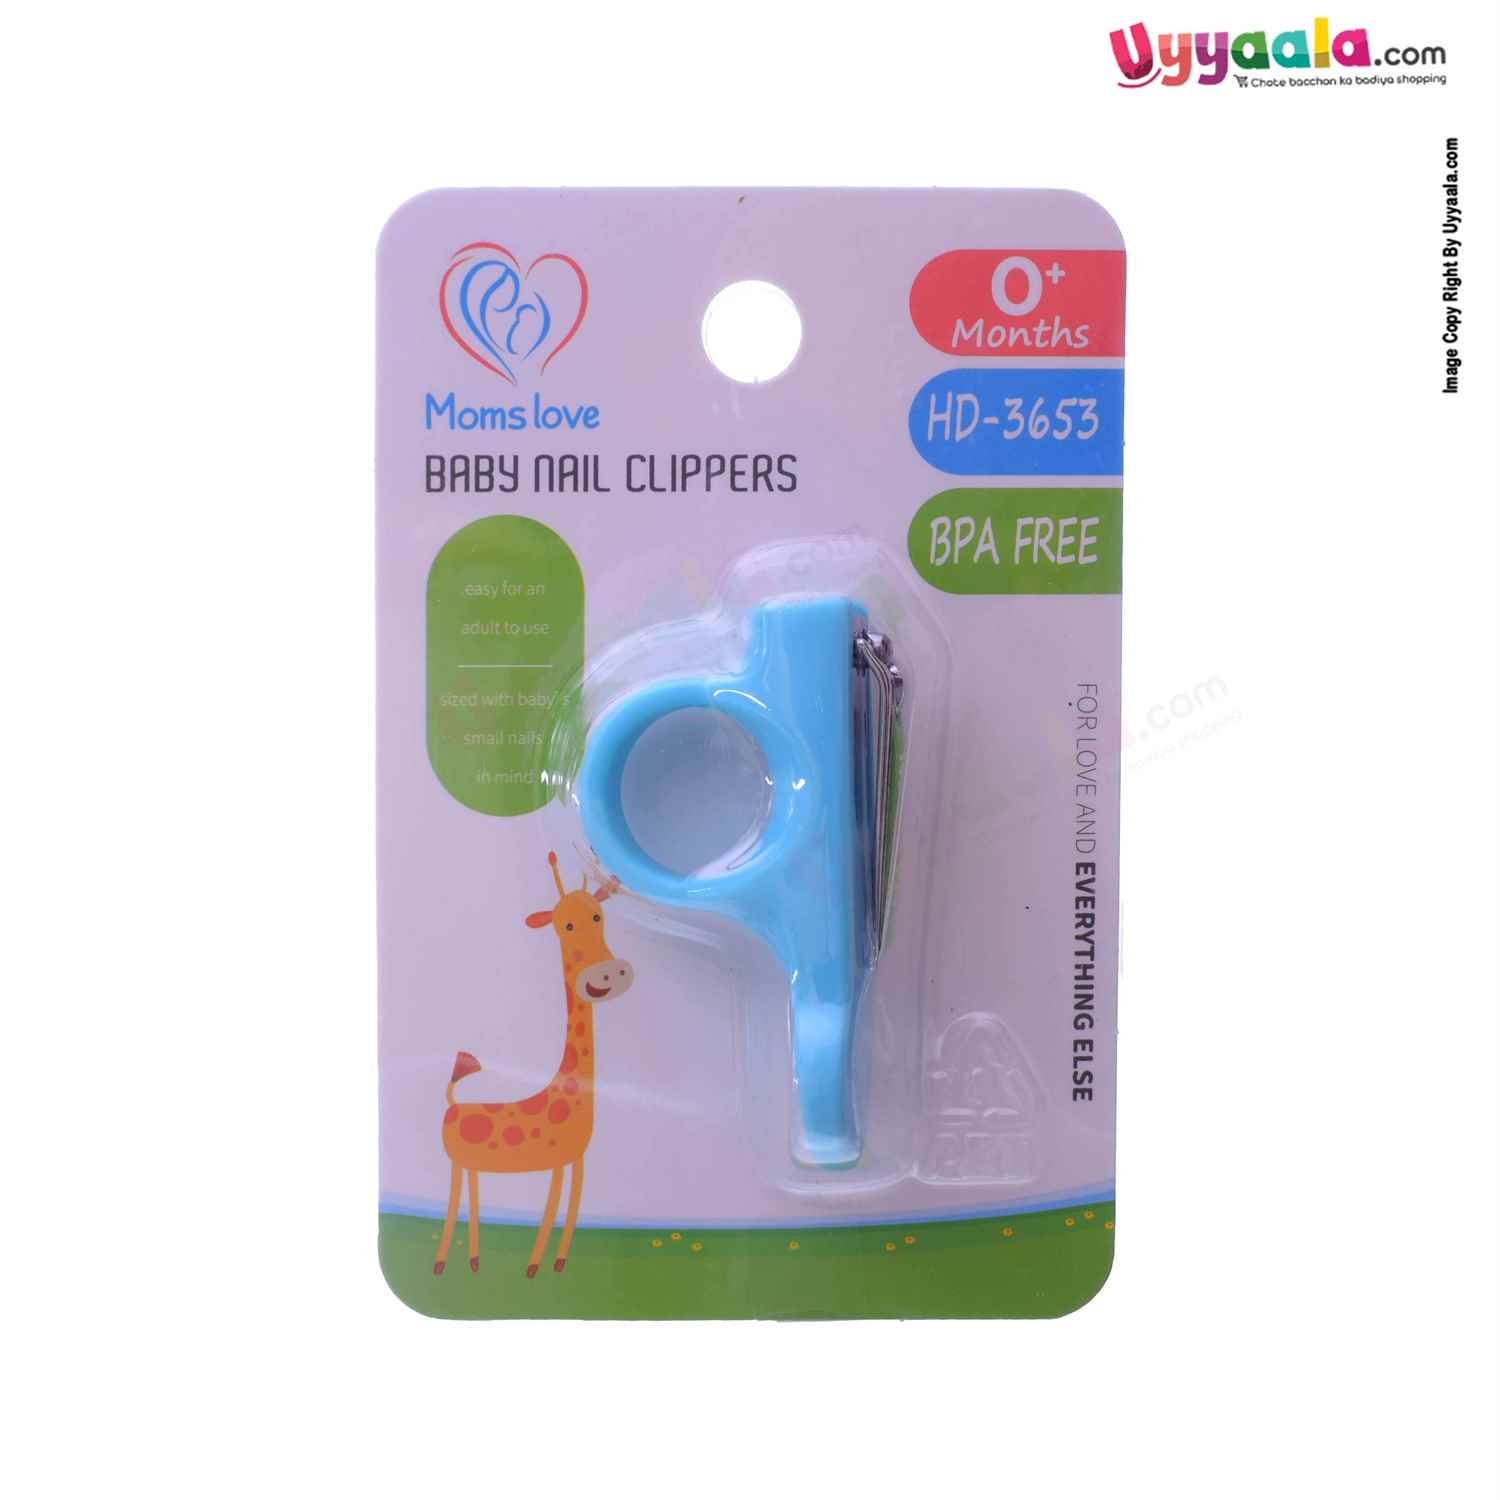 MOMS LOVE Baby Nail Clipper for Babies 0+m Age